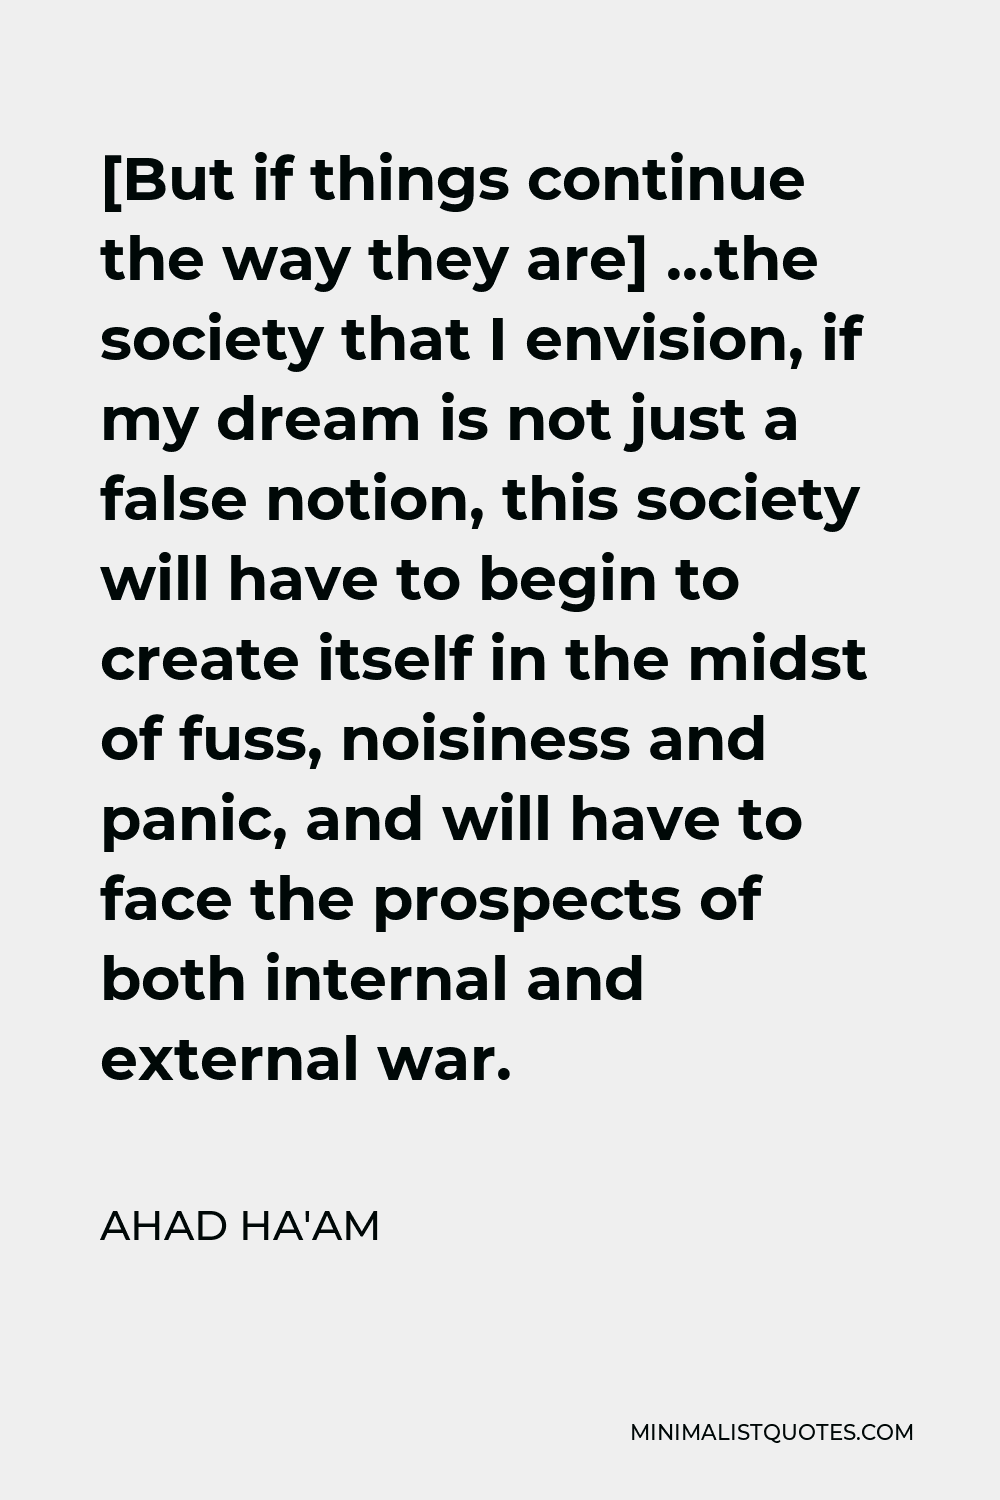 Ahad Ha'am Quote - [But if things continue the way they are] …the society that I envision, if my dream is not just a false notion, this society will have to begin to create itself in the midst of fuss, noisiness and panic, and will have to face the prospects of both internal and external war.